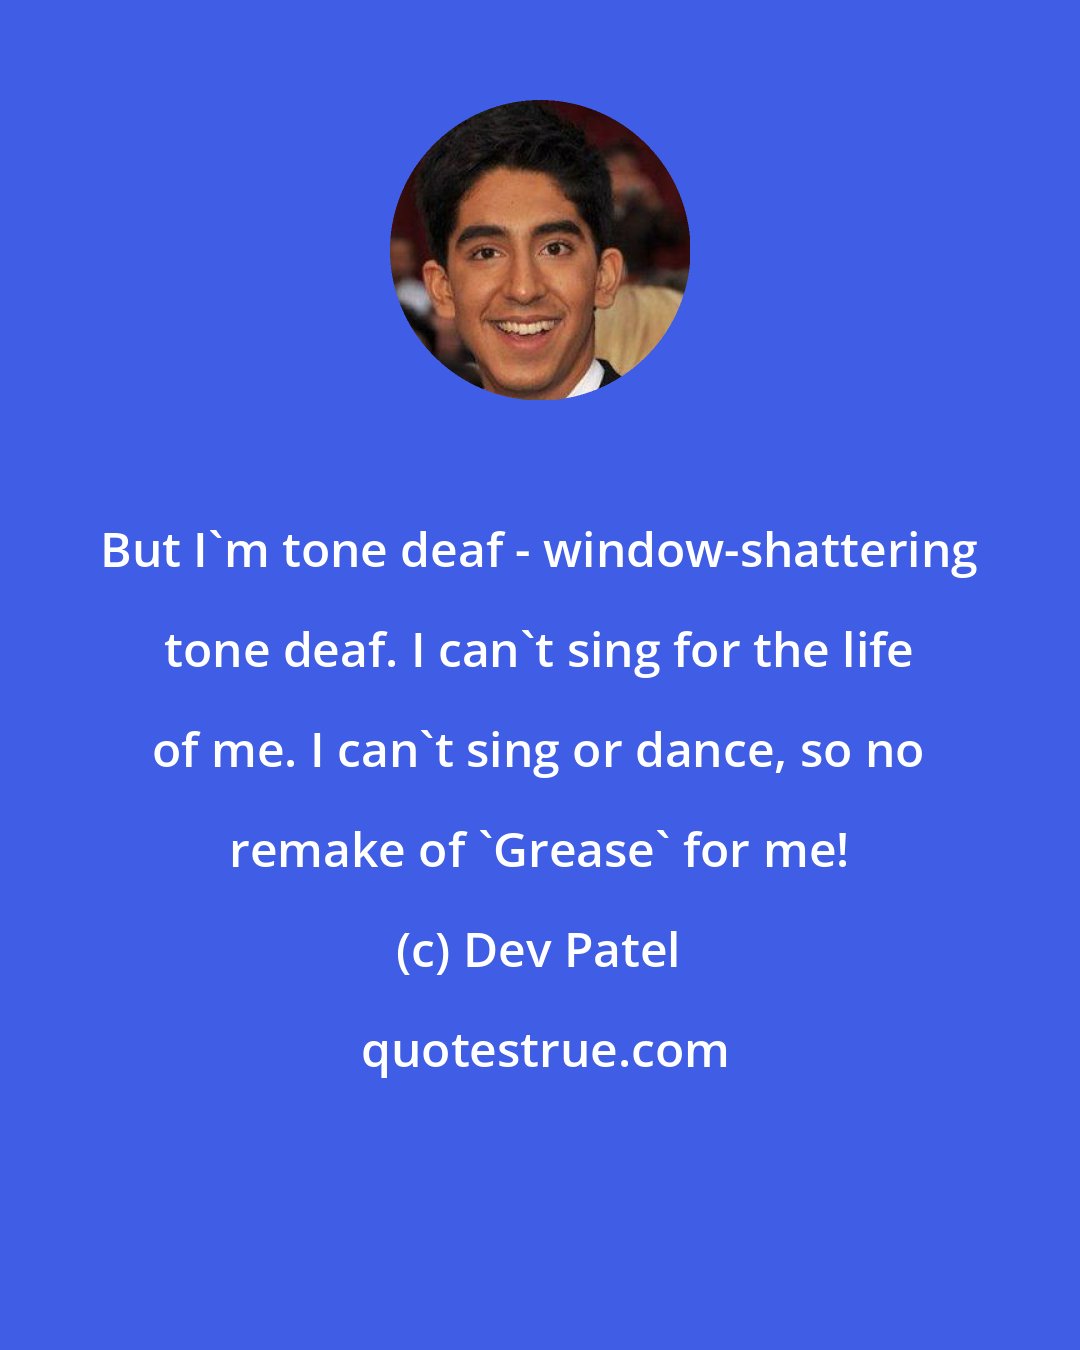 Dev Patel: But I'm tone deaf - window-shattering tone deaf. I can't sing for the life of me. I can't sing or dance, so no remake of 'Grease' for me!